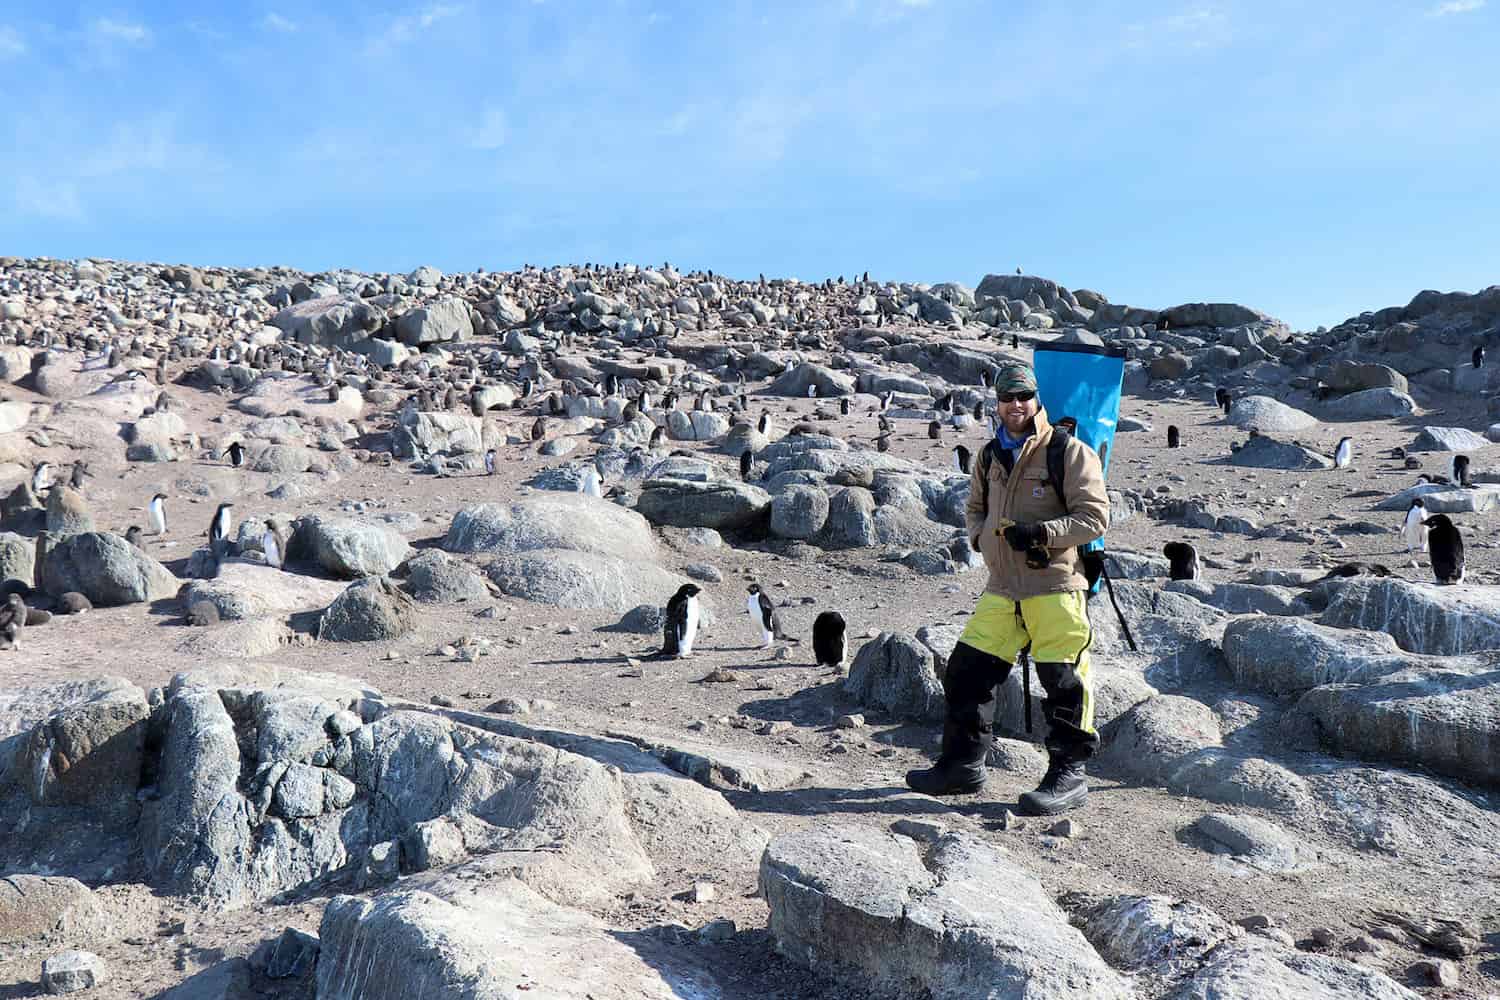 Dr Robert Dickson in rocky landscape with hundreds of penguins